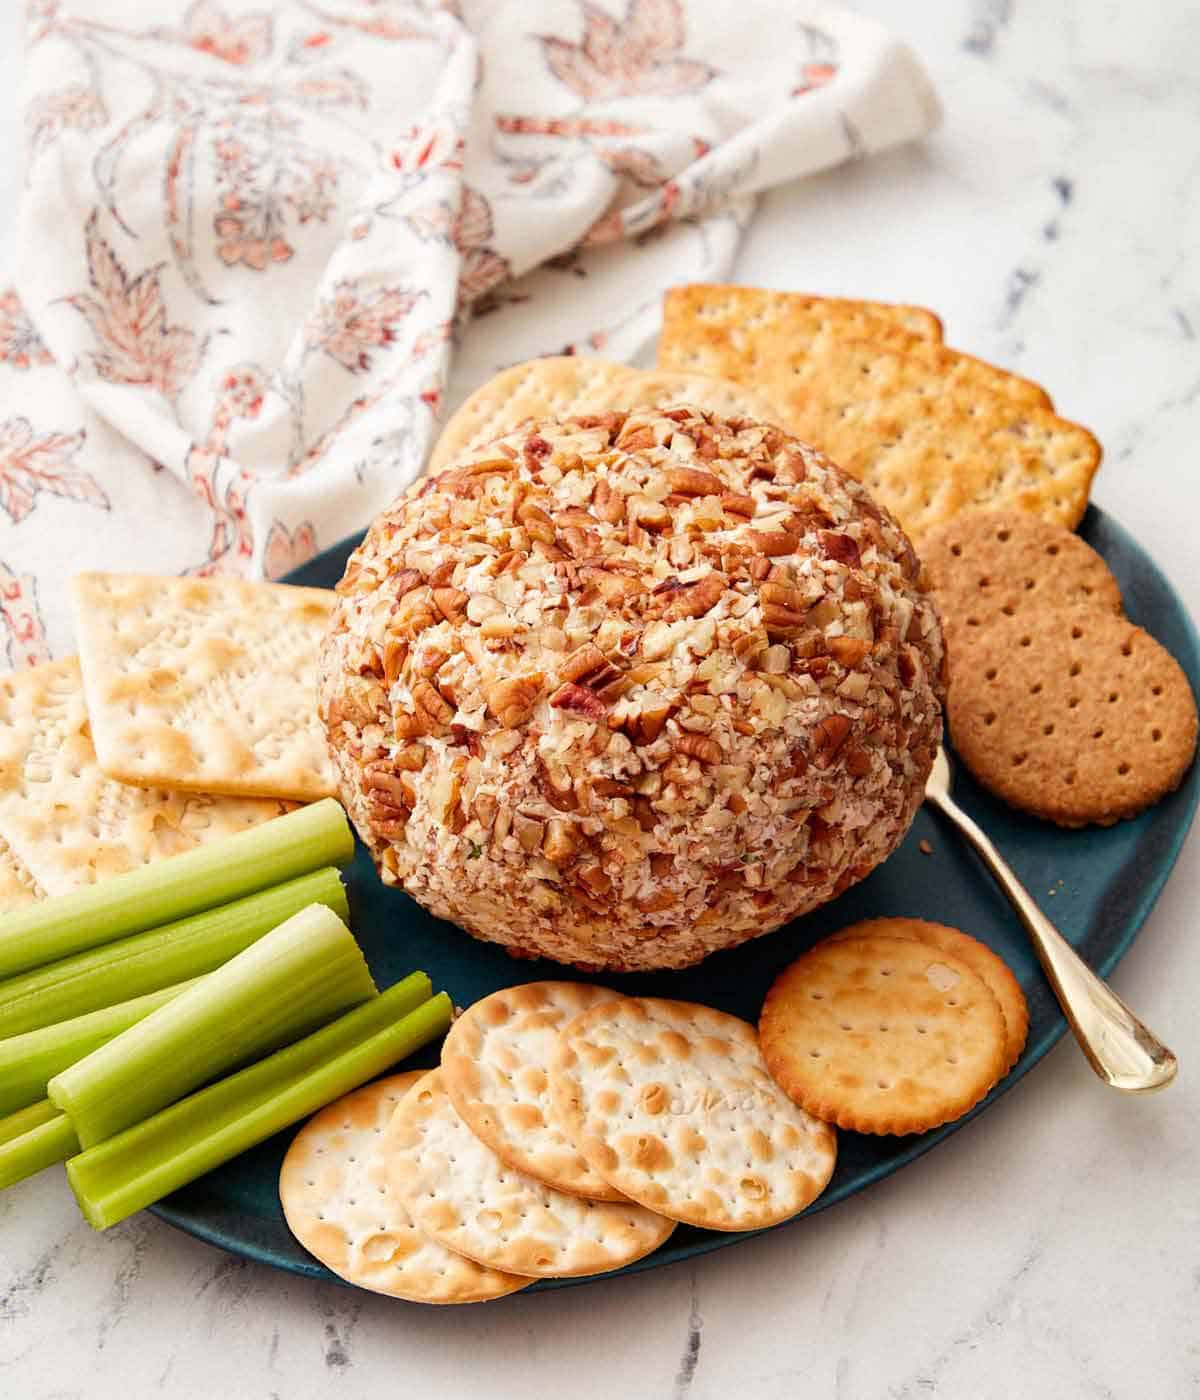 A cheese ball on a blue plate with crackers and celery surrounding it.